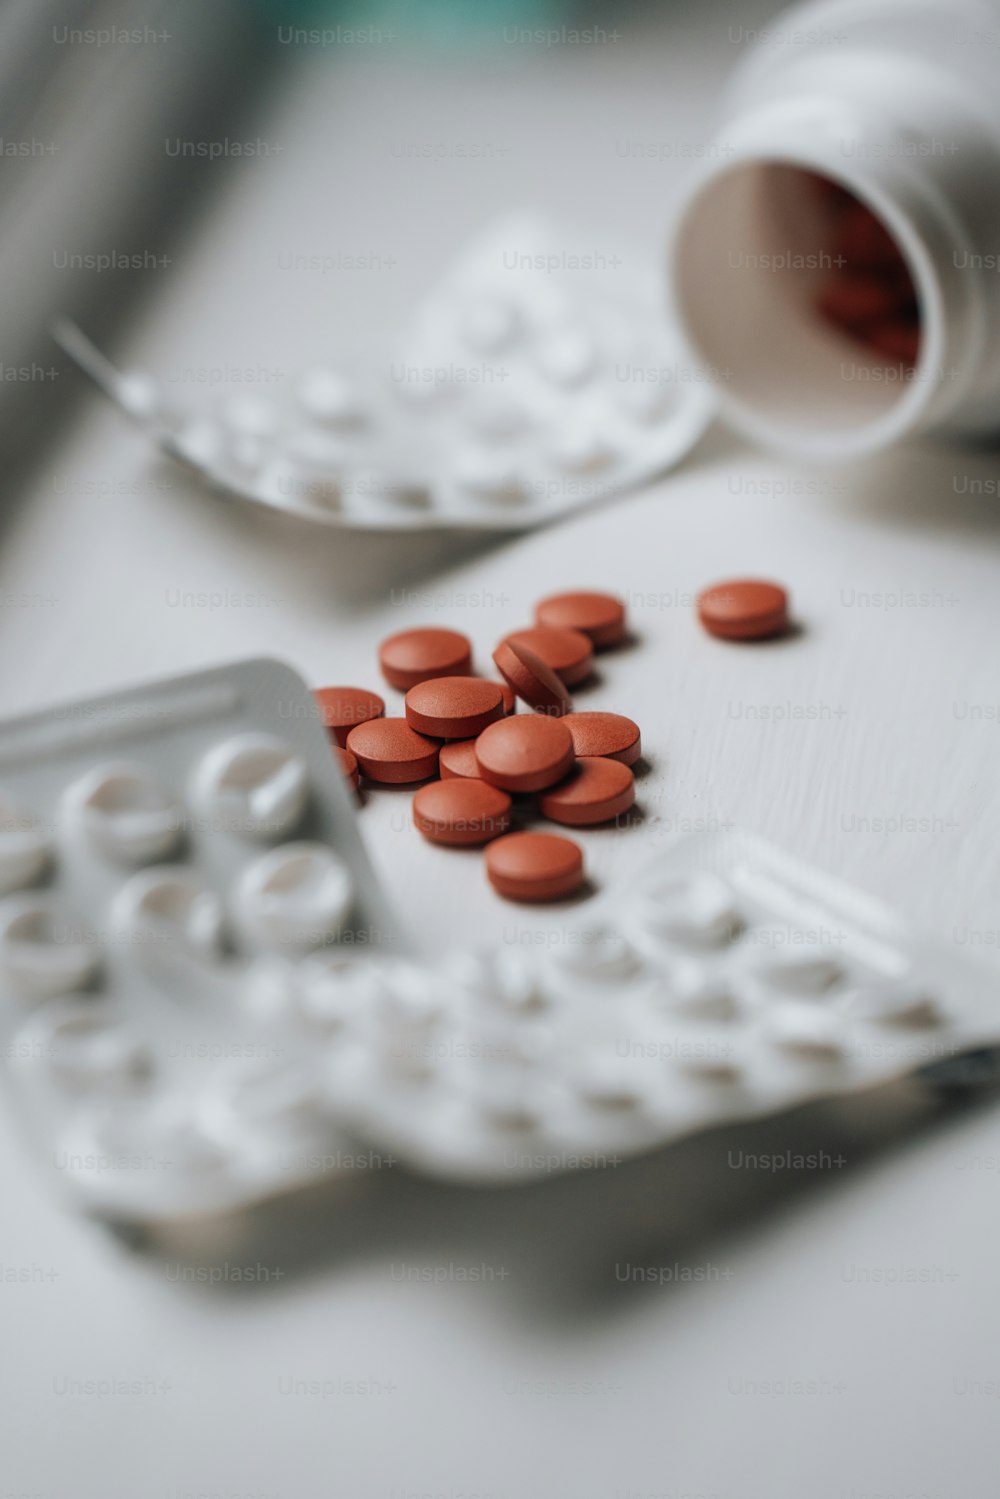 a close up of some pills on a table